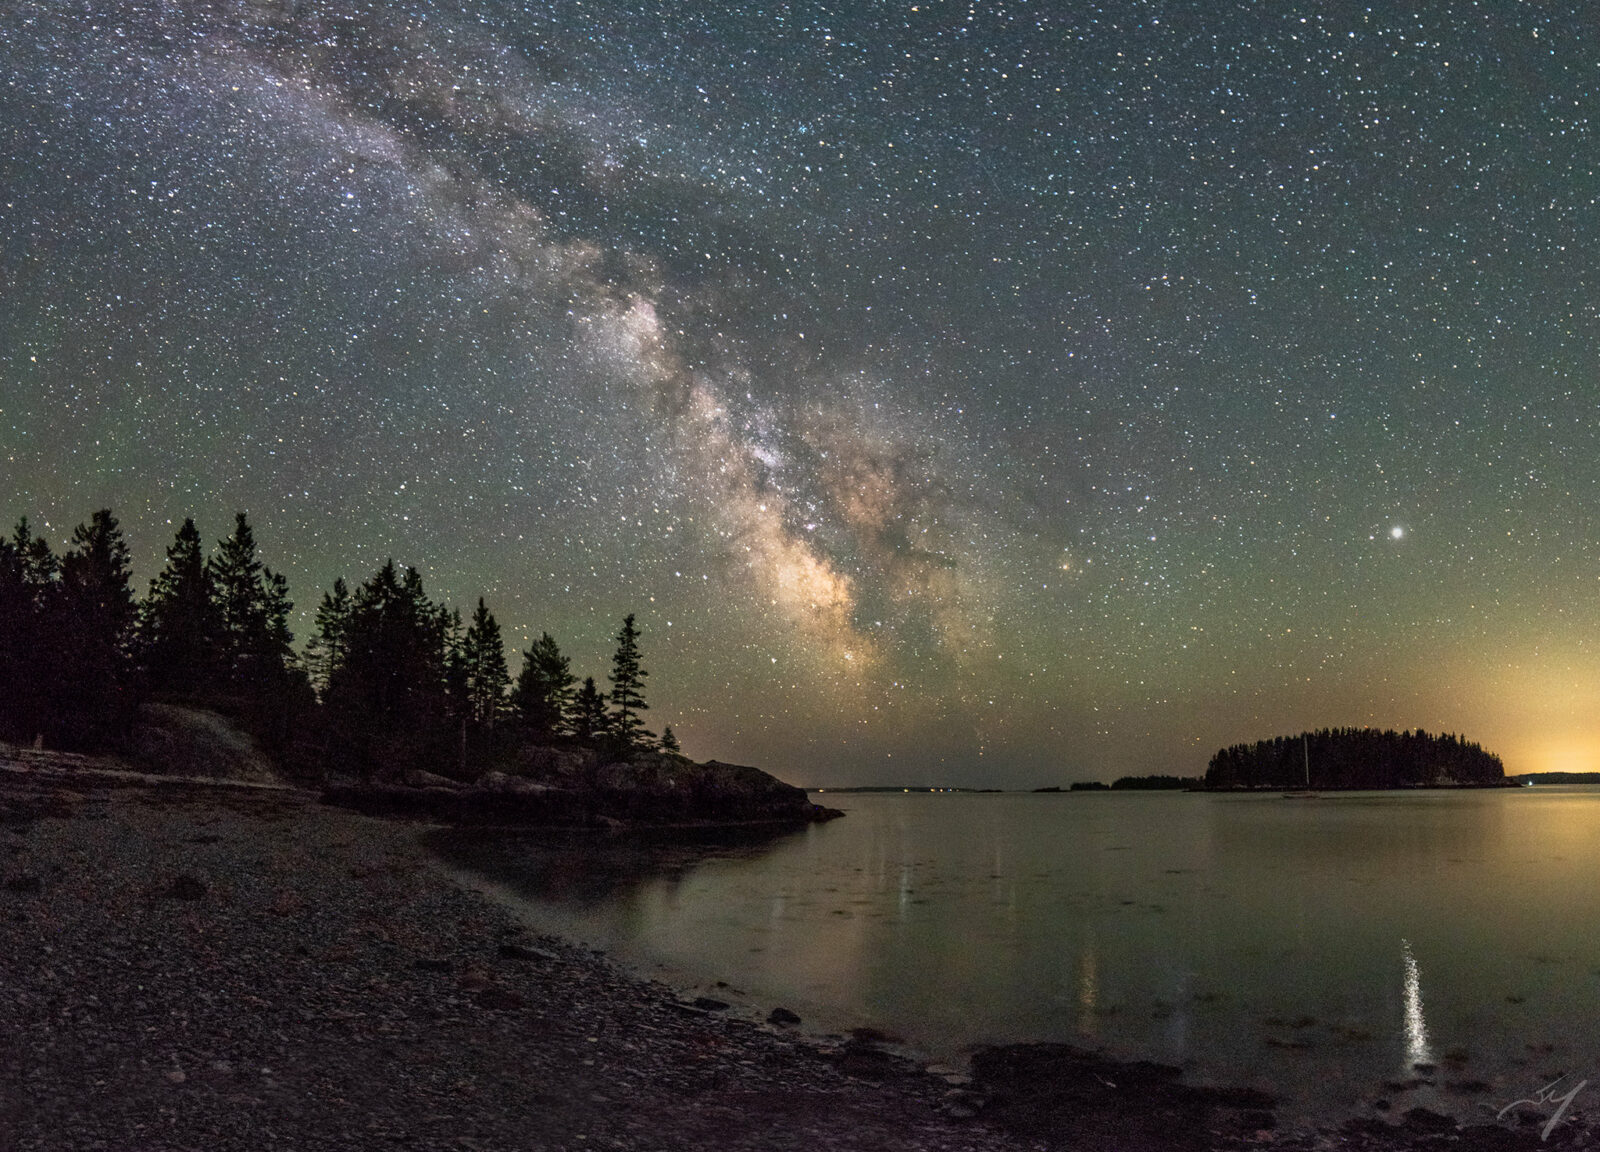 The Milky Way visible over the Penobscot Bay